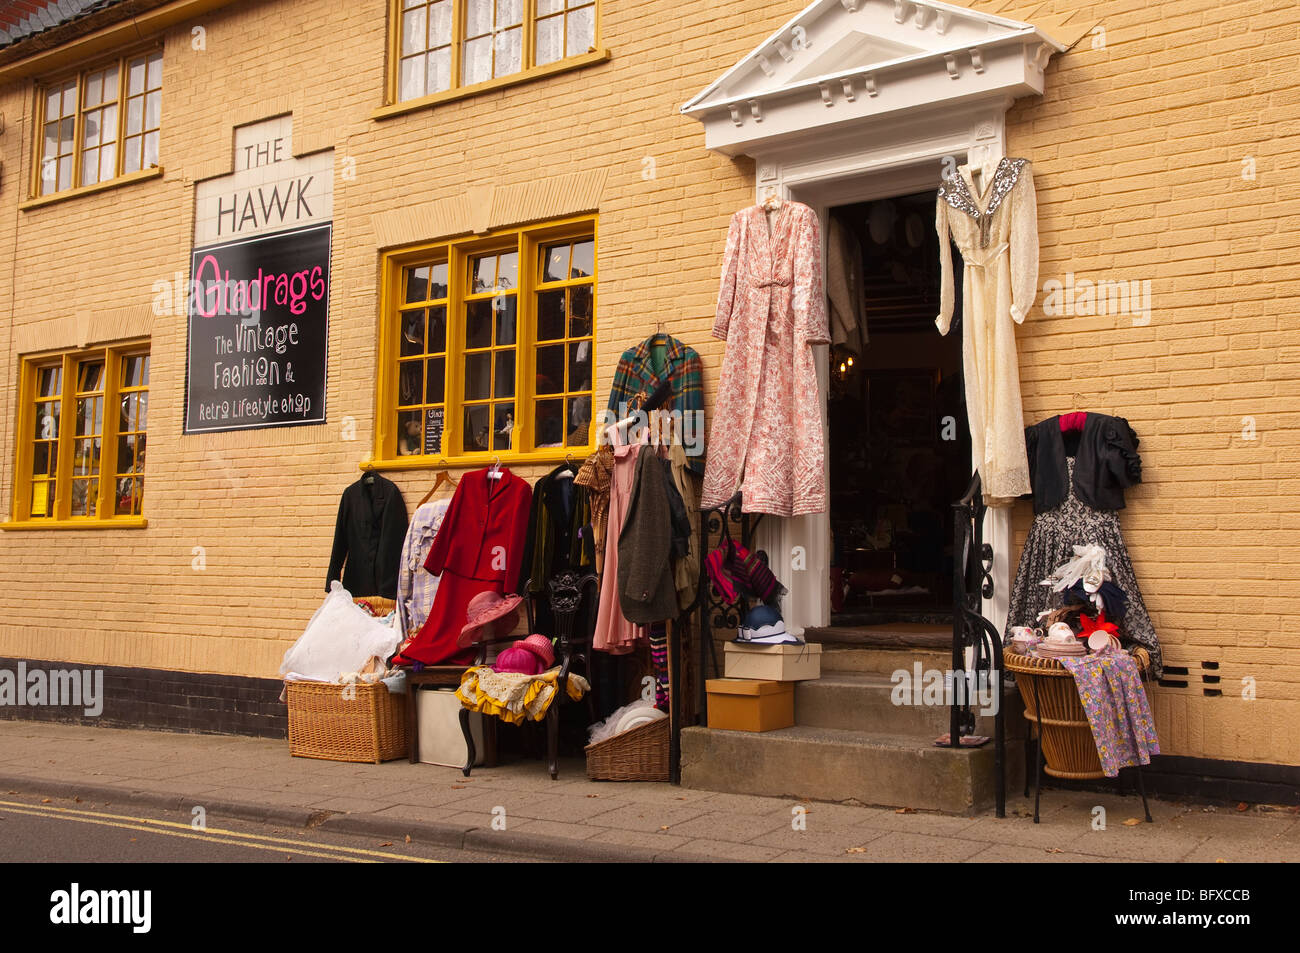 The Gladrags vintage fashion & retro lifestyle clothing Shop store in Halesworth,Suffolk,Uk Stock Photo